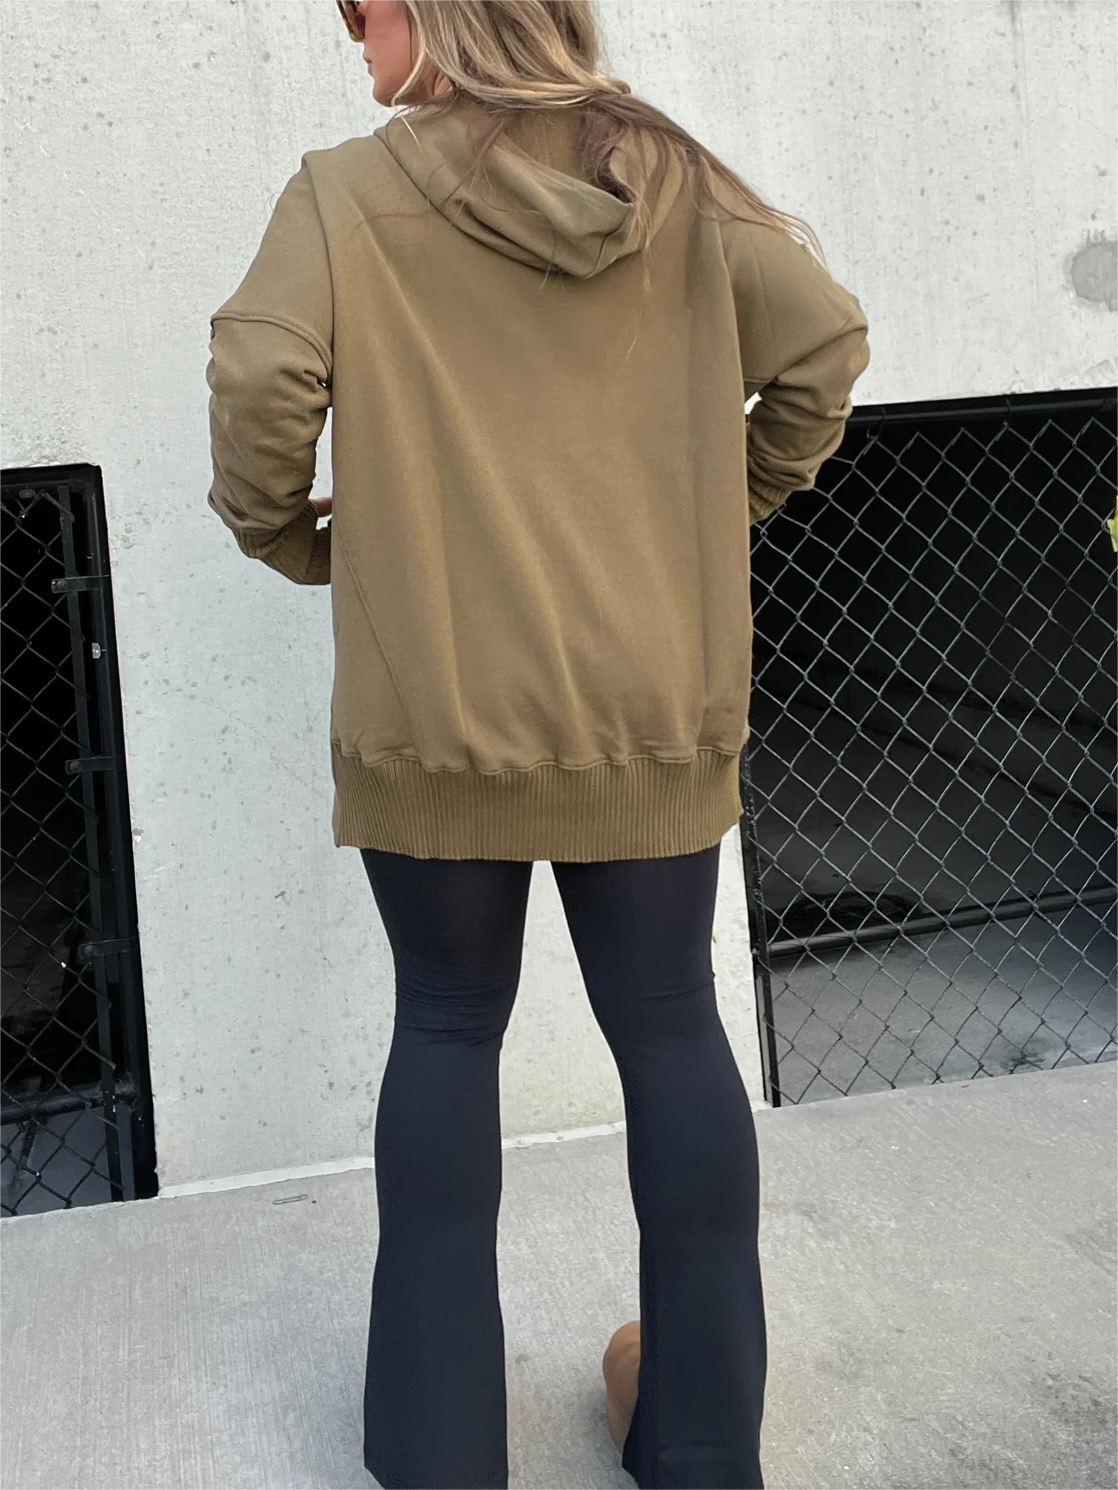 Women's Oversized Hoodie With Thumb Holes (Buy 2 Free Shipping)